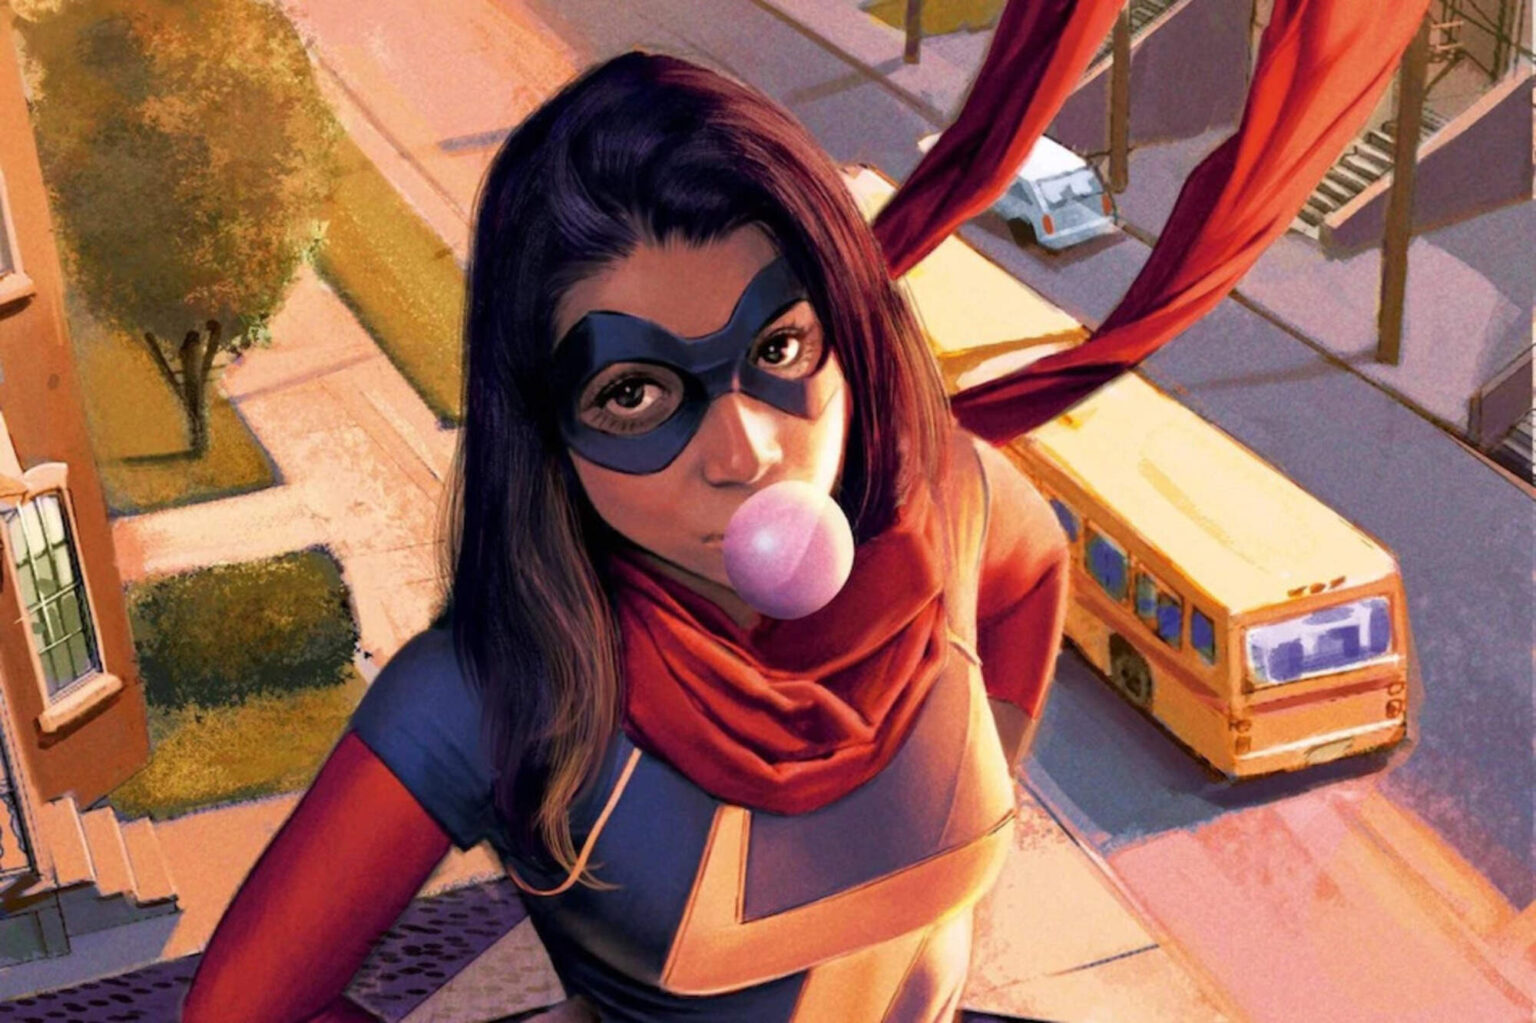 Marvel & Disney’s 'Ms Marvel' explores the life of a new teenage superhero Ms. Marvel. Learn more about the upcoming show here.